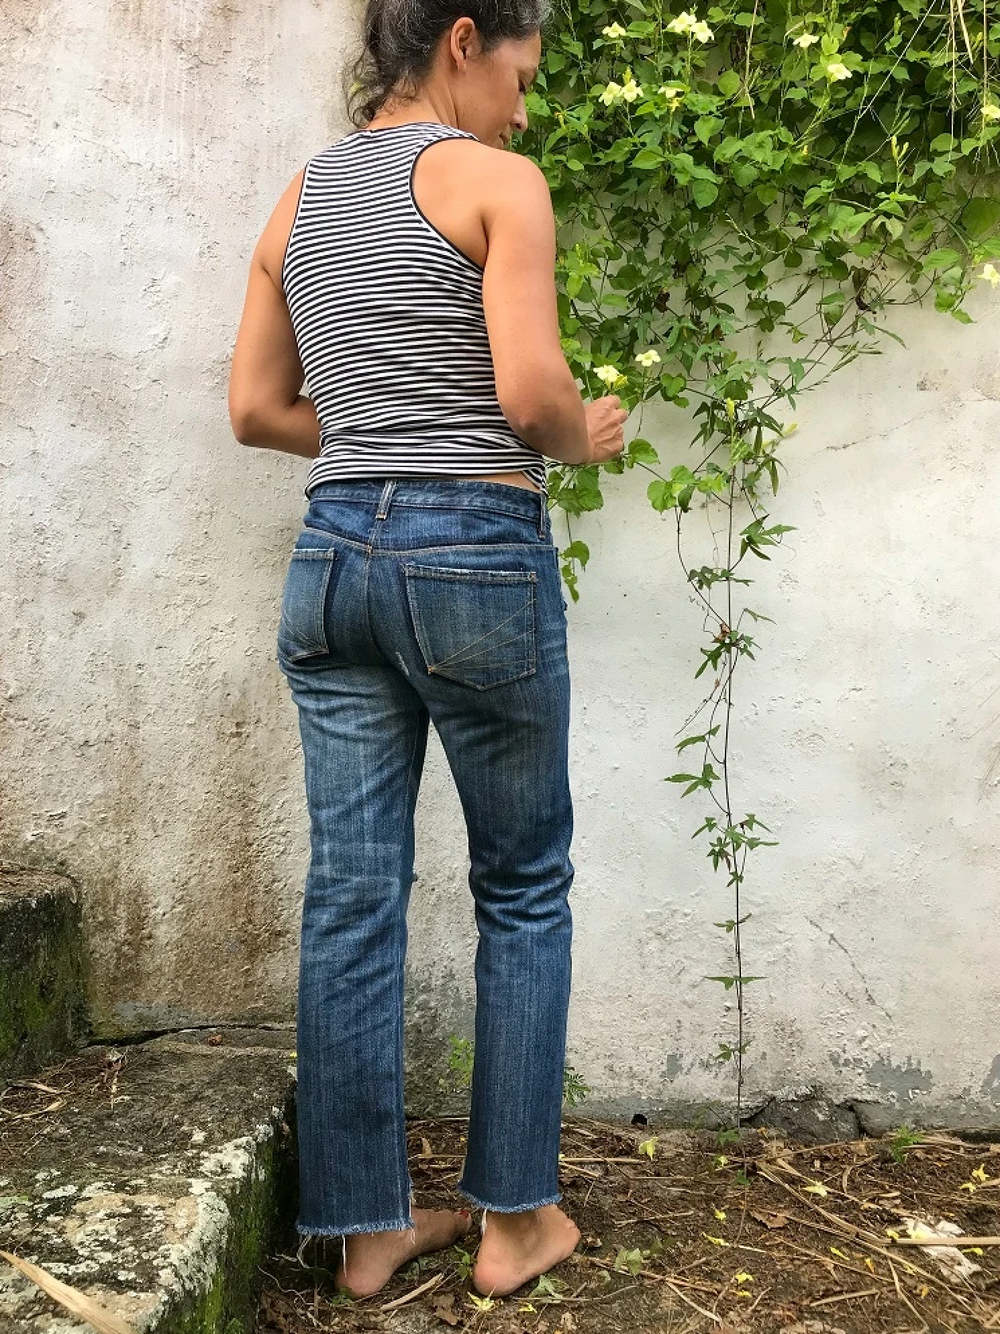 Woman wearing the Halfmoon 101 Jeans pattern from Halfmoon Atelier on The Fold Line. A jeans pattern made in denim fabrics, featuring a lower-rise, straight leg, snug fit around the hips and upper thighs, front pockets and back patch pockets.